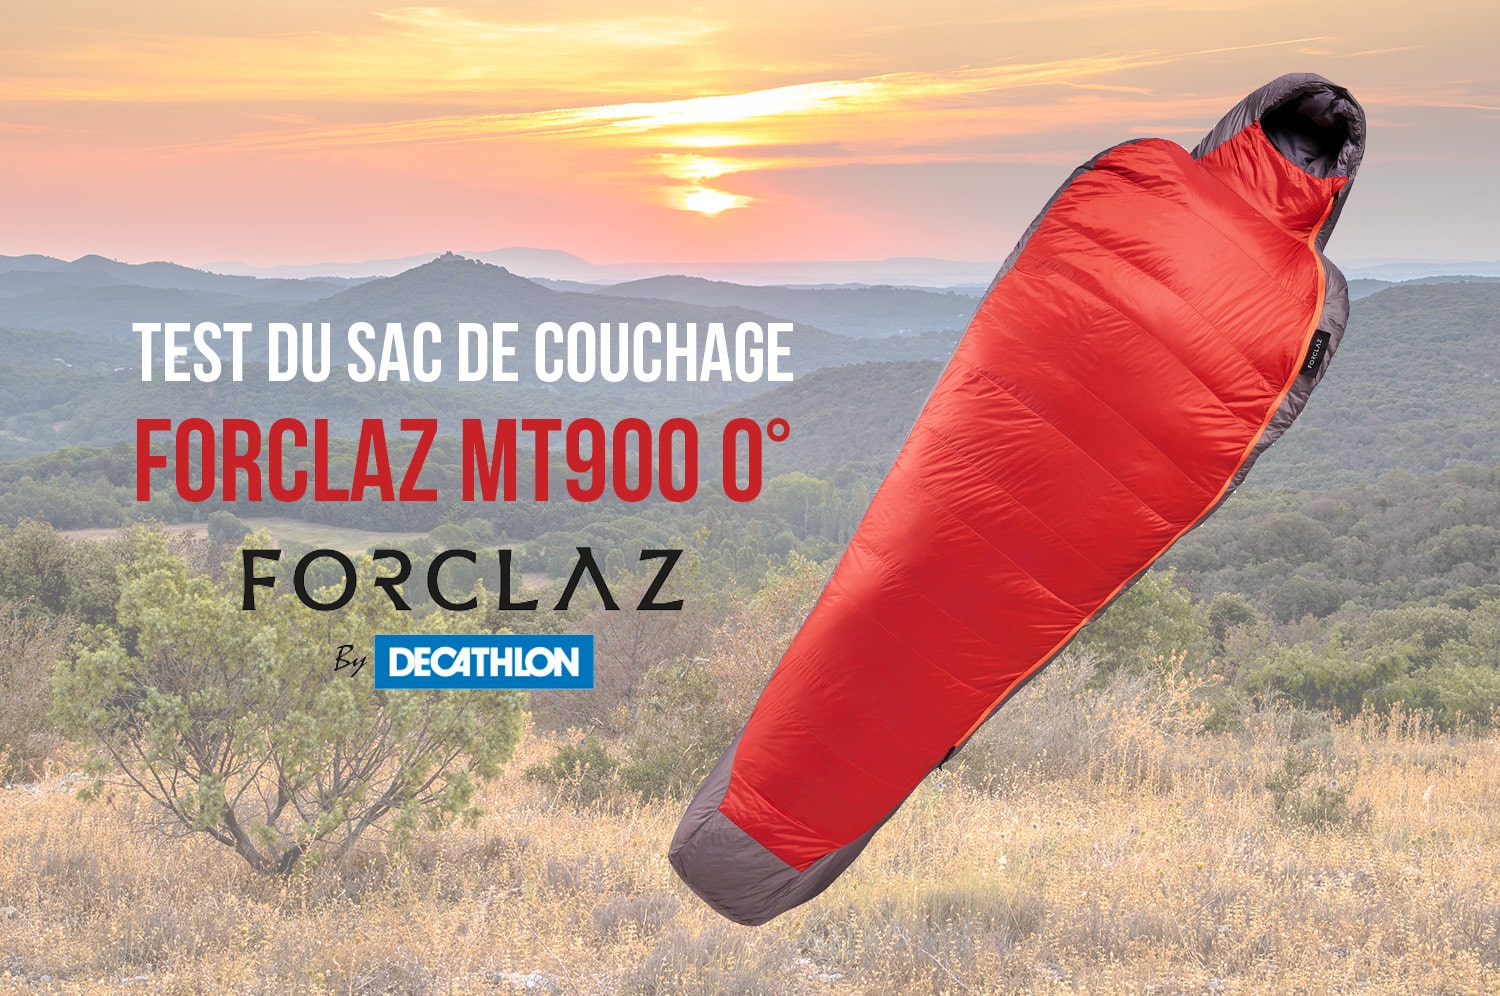 You are currently viewing Test du sac de couchage Forclaz MT900